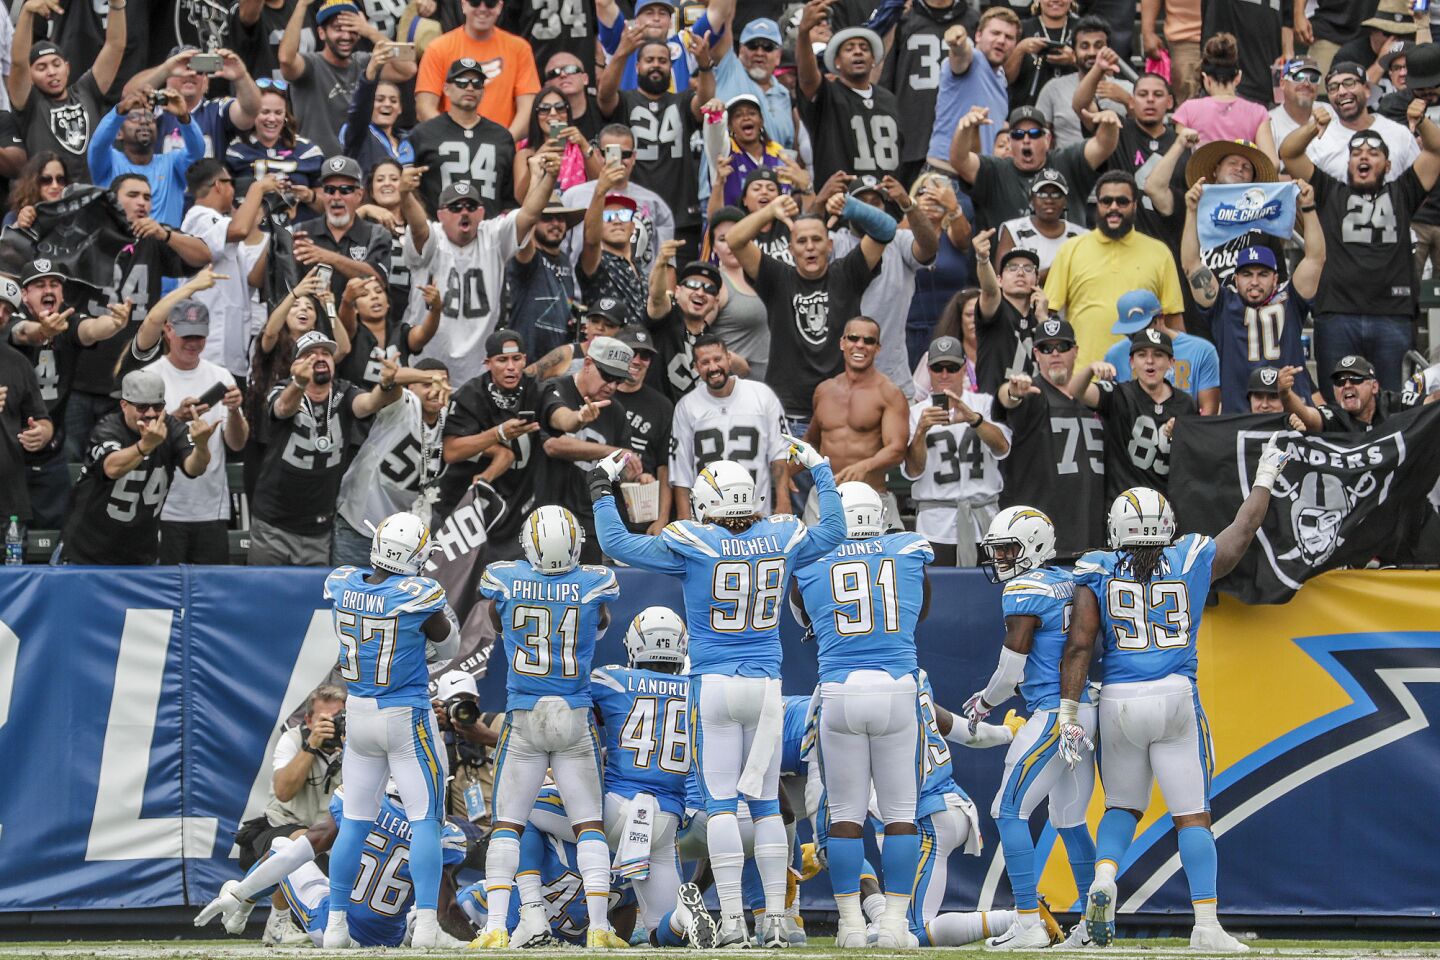 The Chargers defensive unit faces off against a section full of Raiders fans after linebacker Melvin Ingram intercepted a Derek Carr pass in the end zone, stopping a third quarter drive.